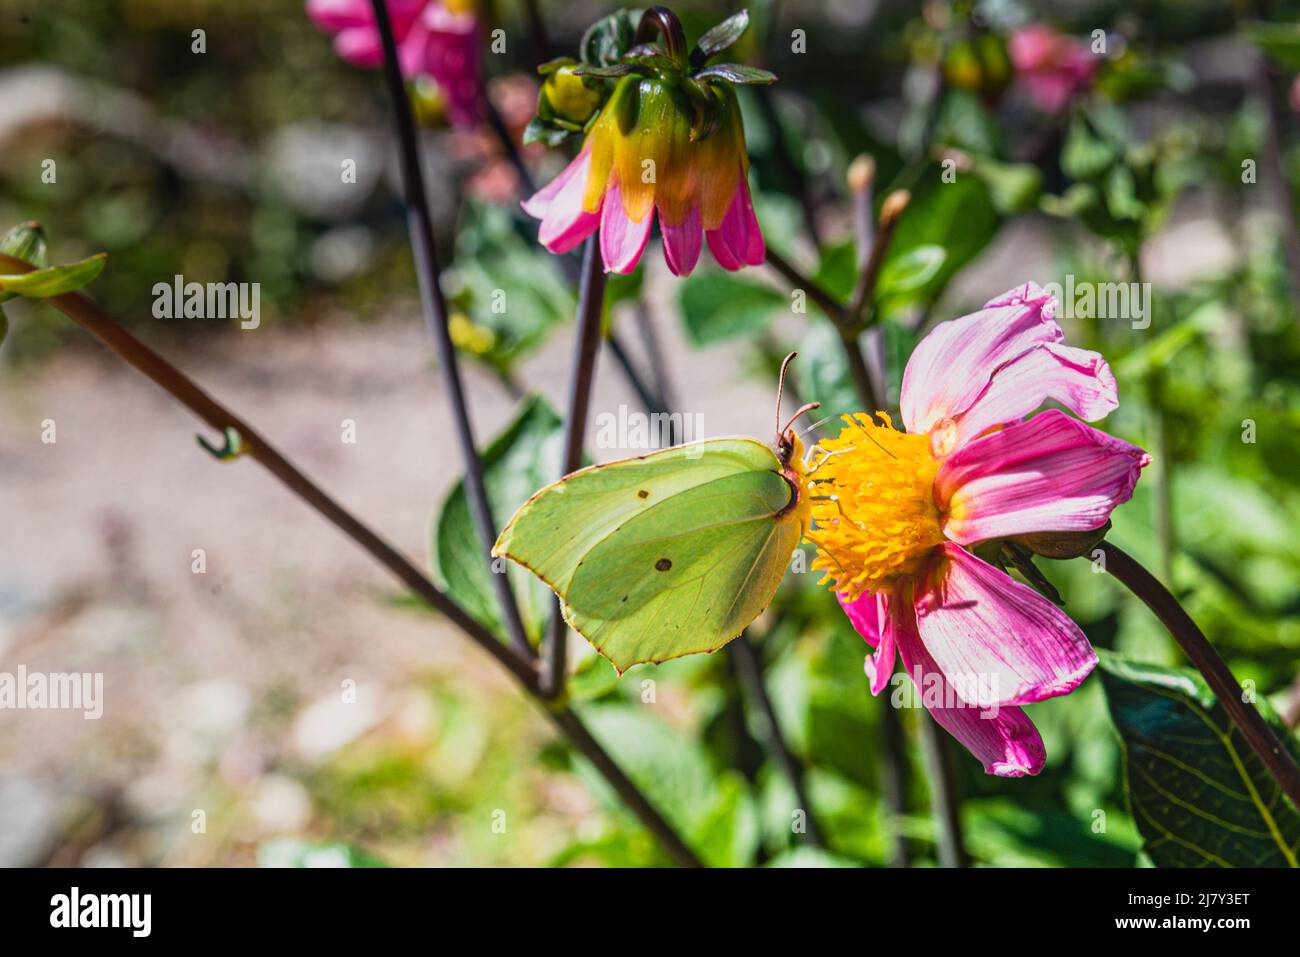 Gonepteryx rhamni Brimstones butterfly. Yellow butterfly detail collecting nectar from flowers shows the role insects (pollinator) play in pollination Stock Photo